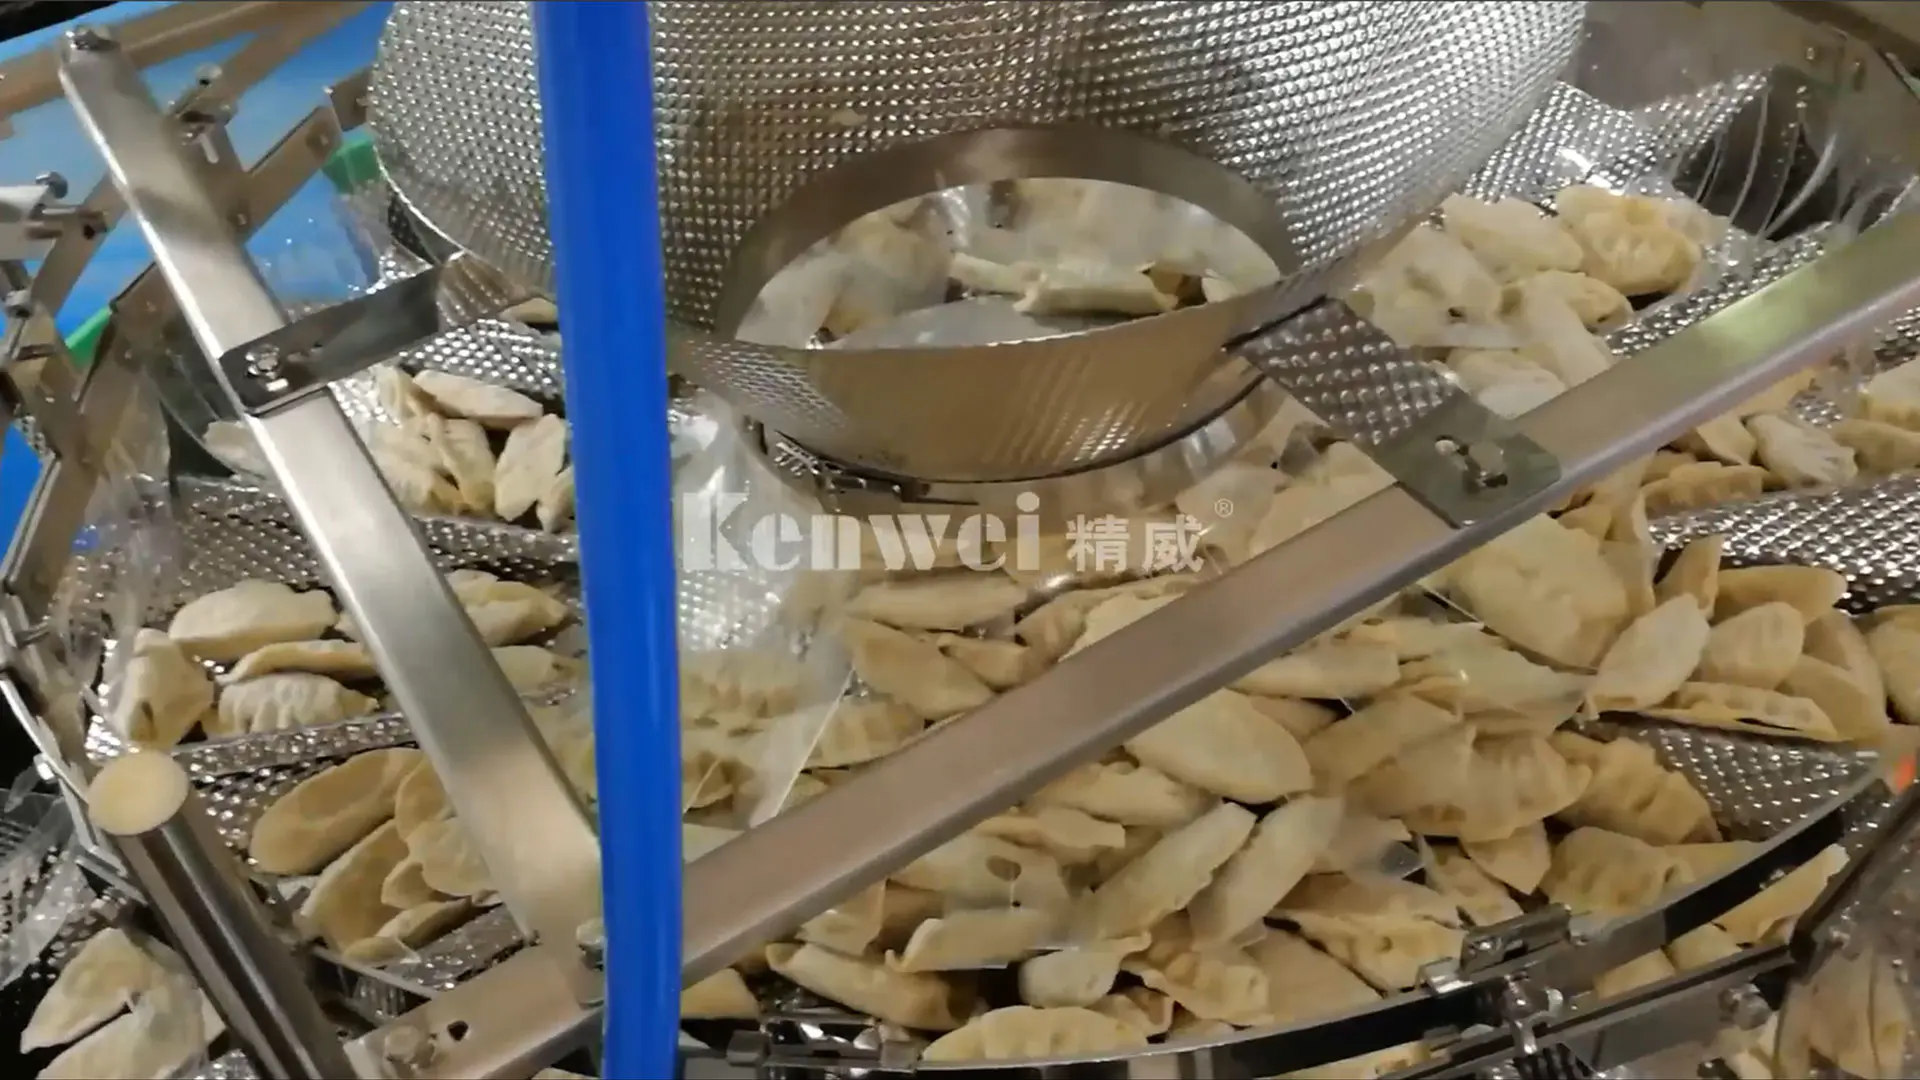 Kenwei door services provide customers with automated dumpling packaging system